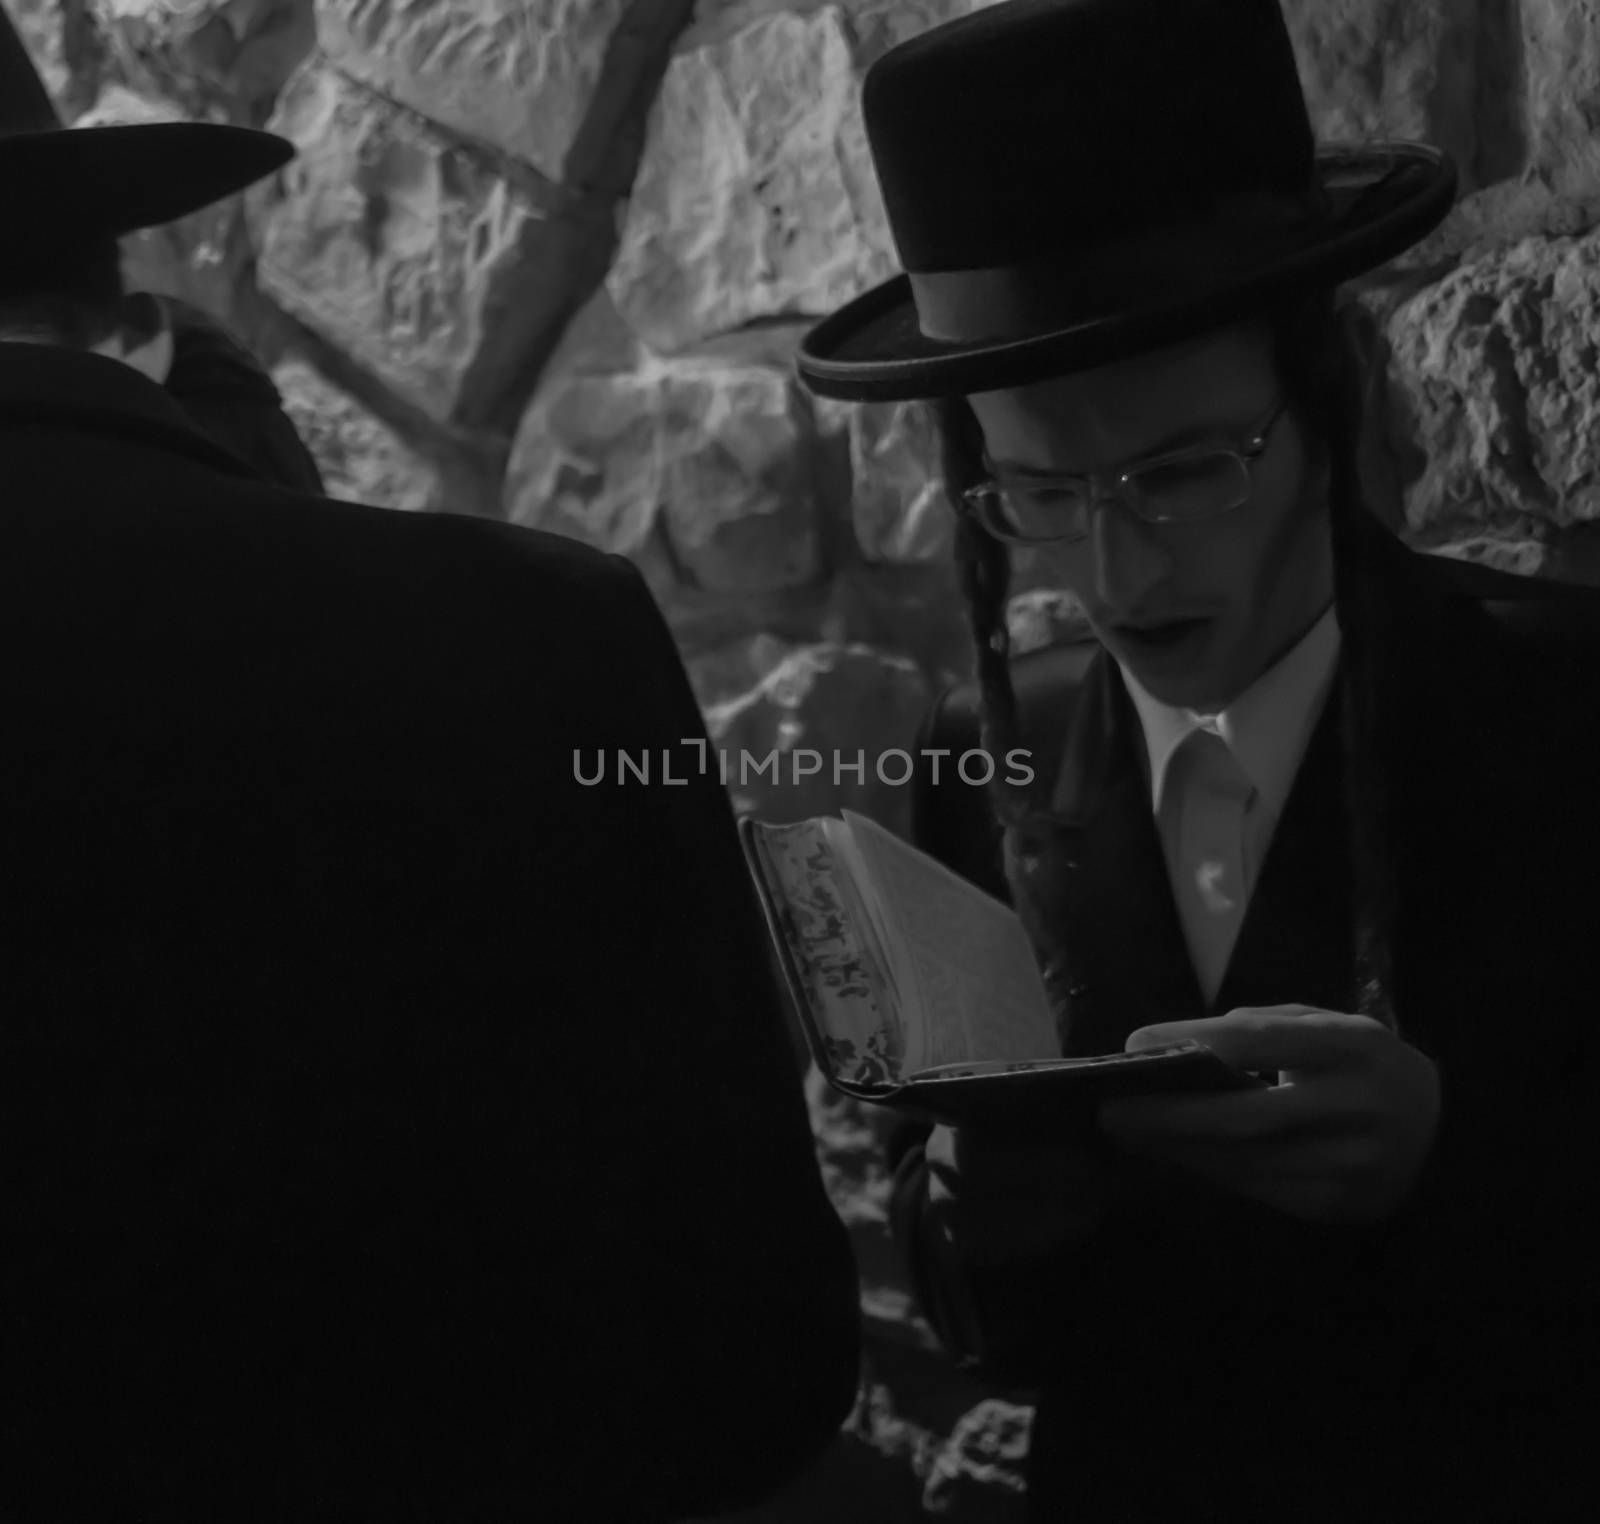 MERON, ISRAEL - MAY 18, 2014: An orthodox Jew prays at the annual hillulah of Rabbi Shimon Bar Yochai, in Meron, on Lag BaOmer Holiday. This is an annual celebration at the tomb of Rabbi Shimon